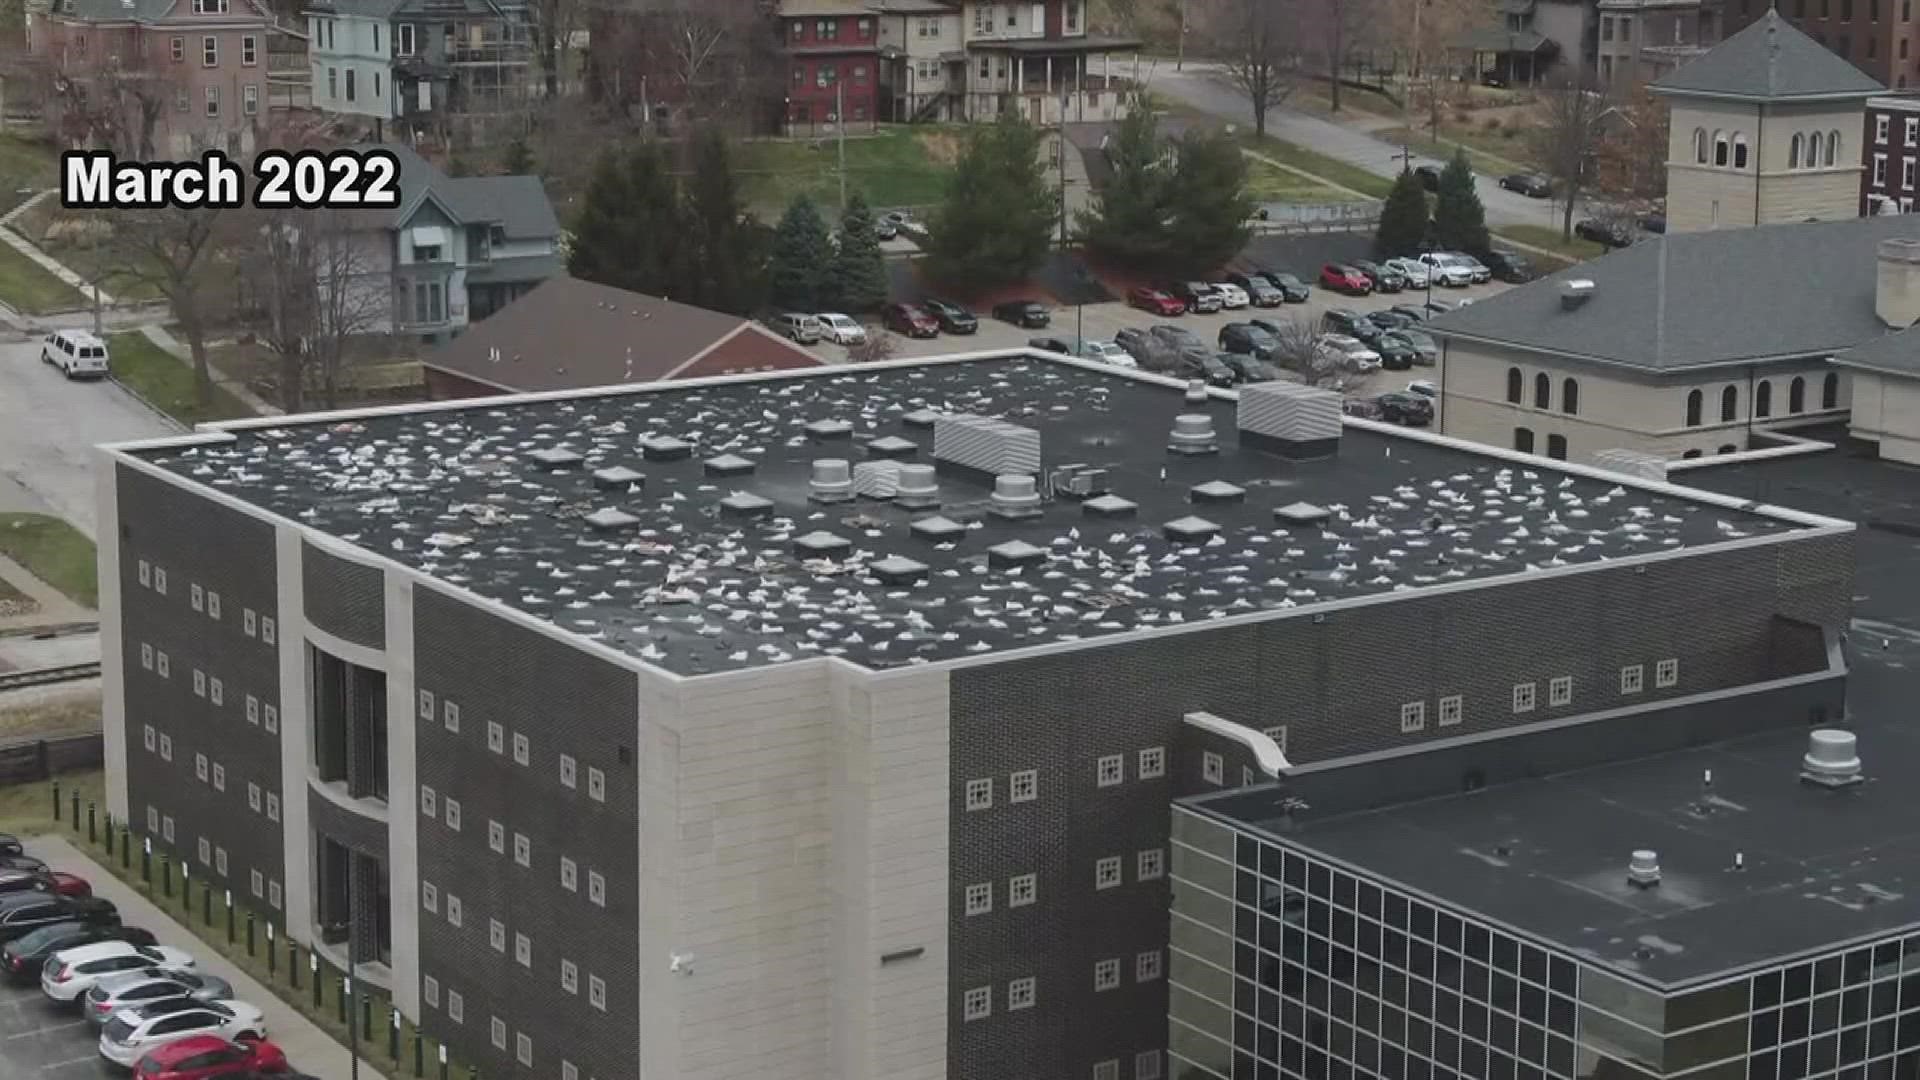 Hundreds of sandbags have been on top of the jail's roof as a temporary fix after severe weather damage in early March.